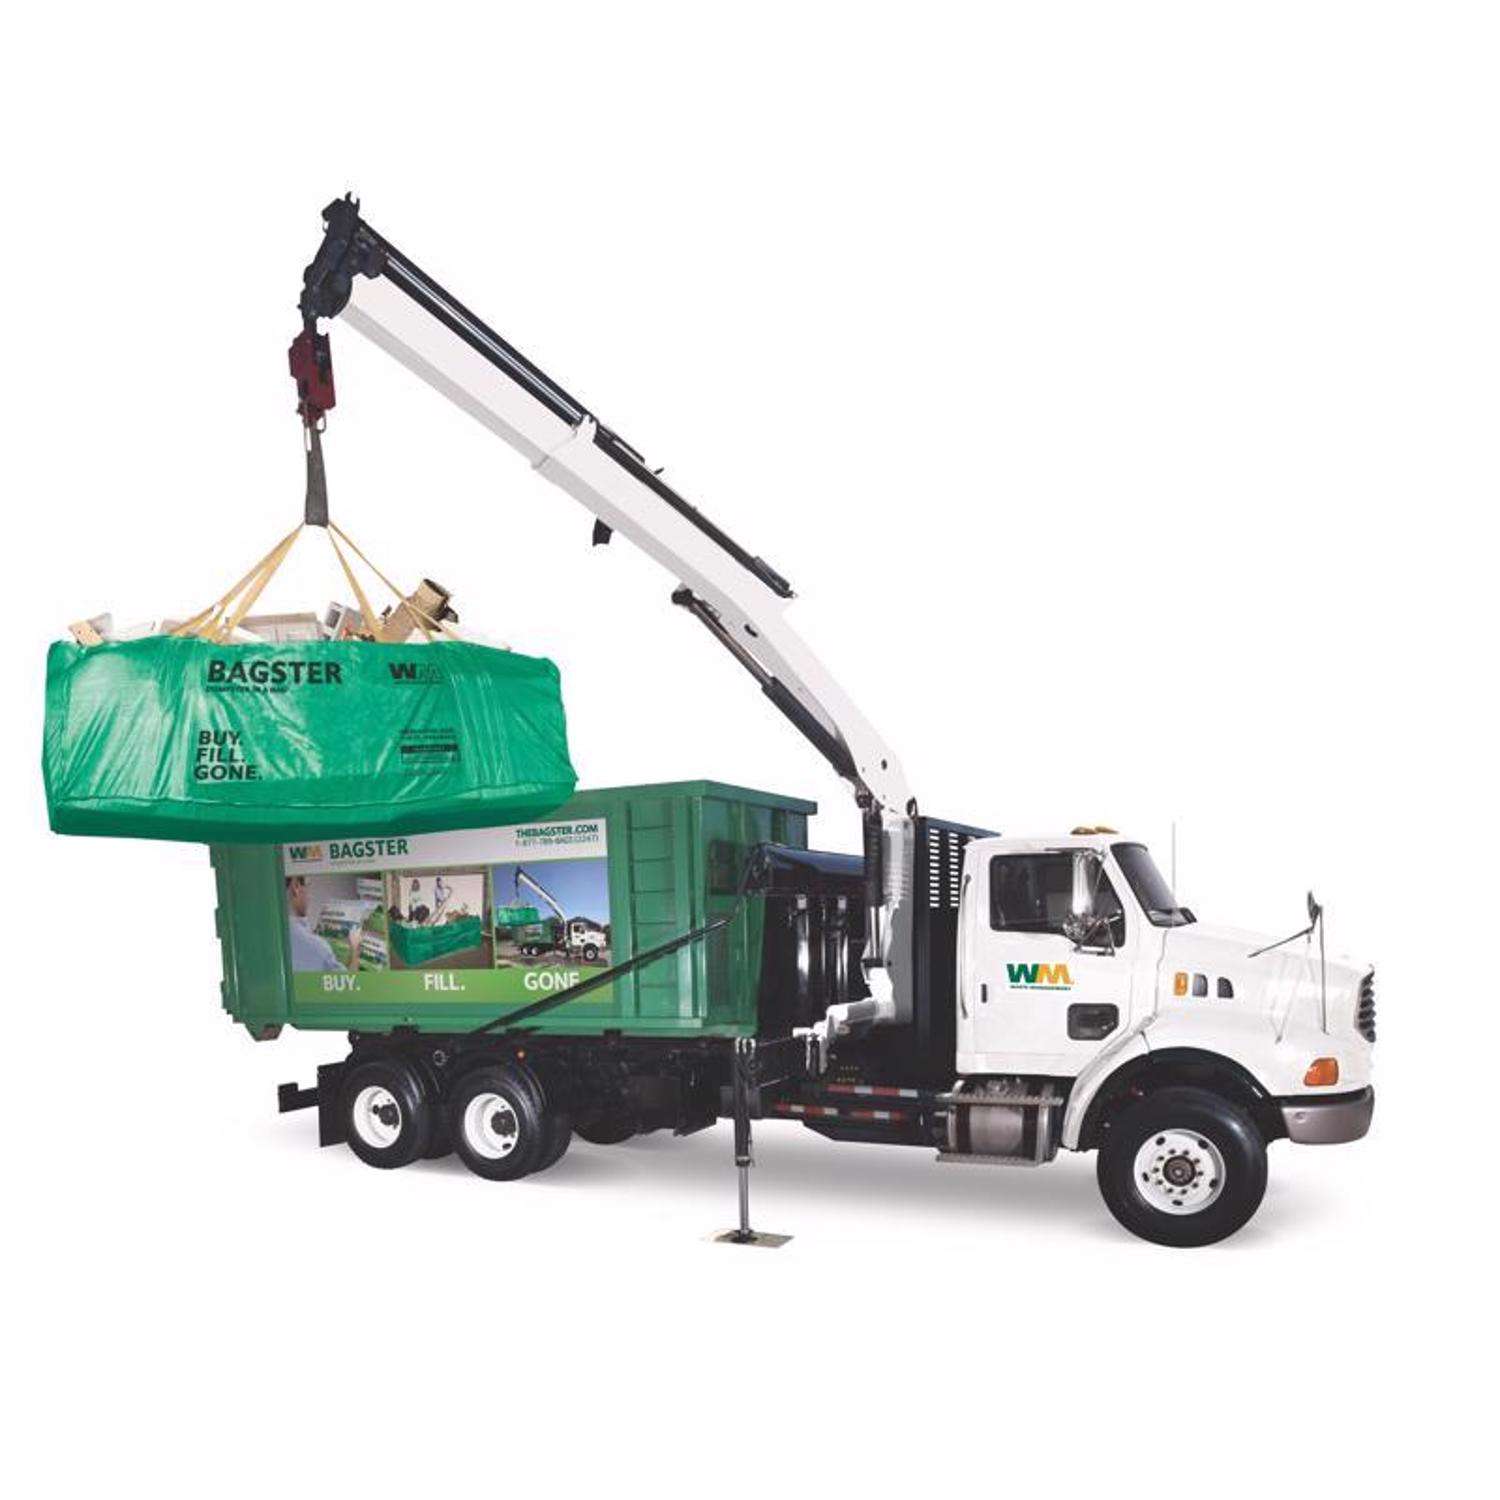 Easily remove junk around your home or business with The Gator Dumpster Bag